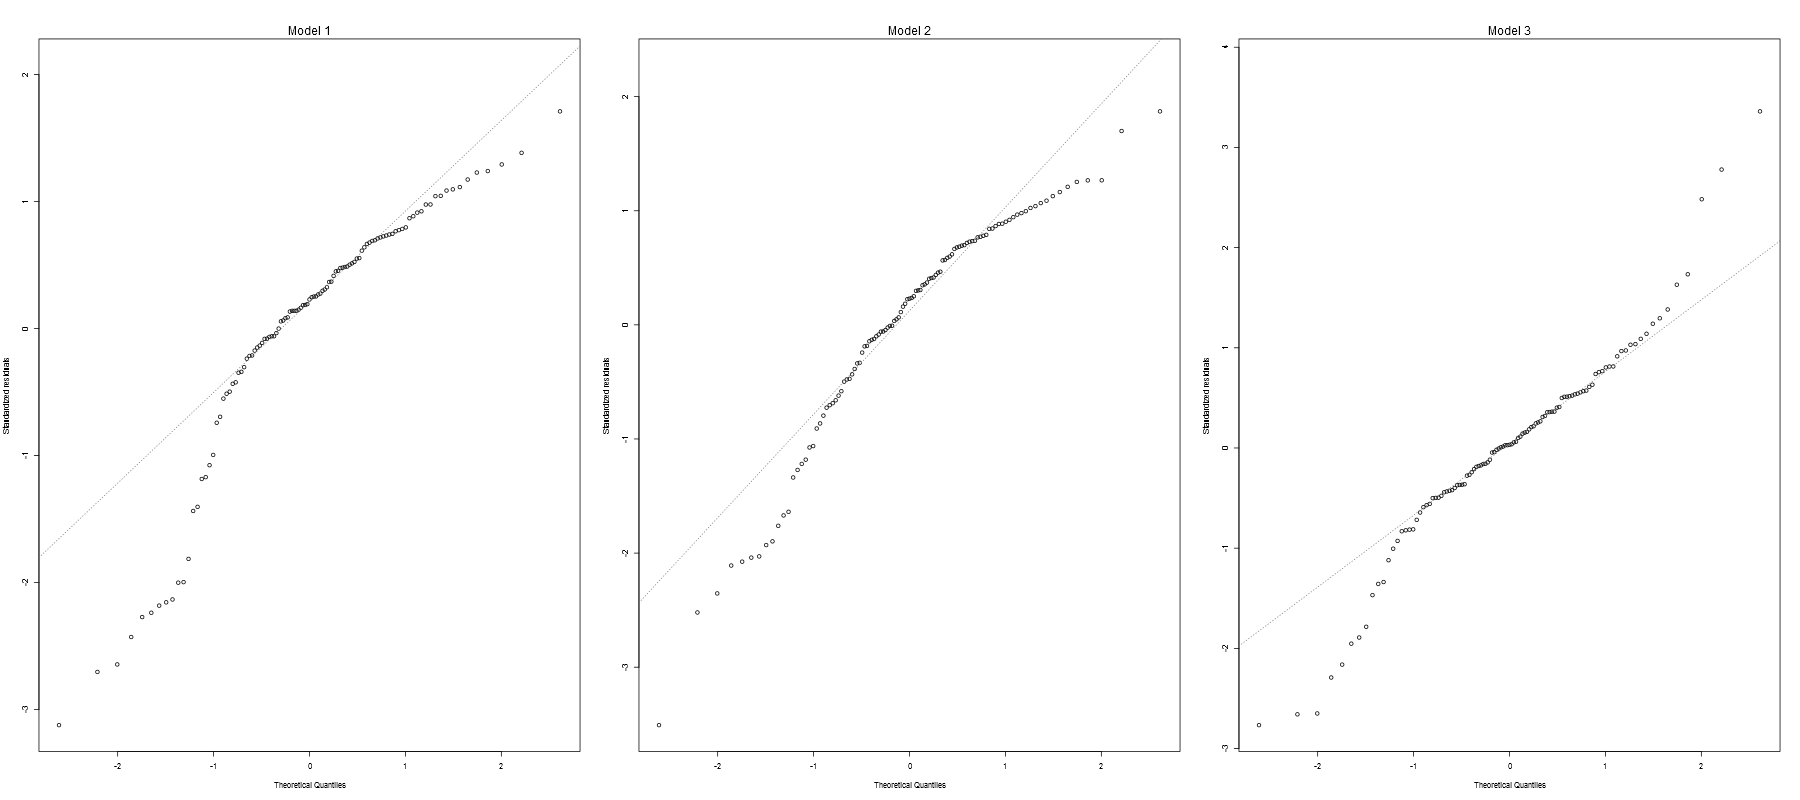 Quantile-quantile plots of residuals from three different models.